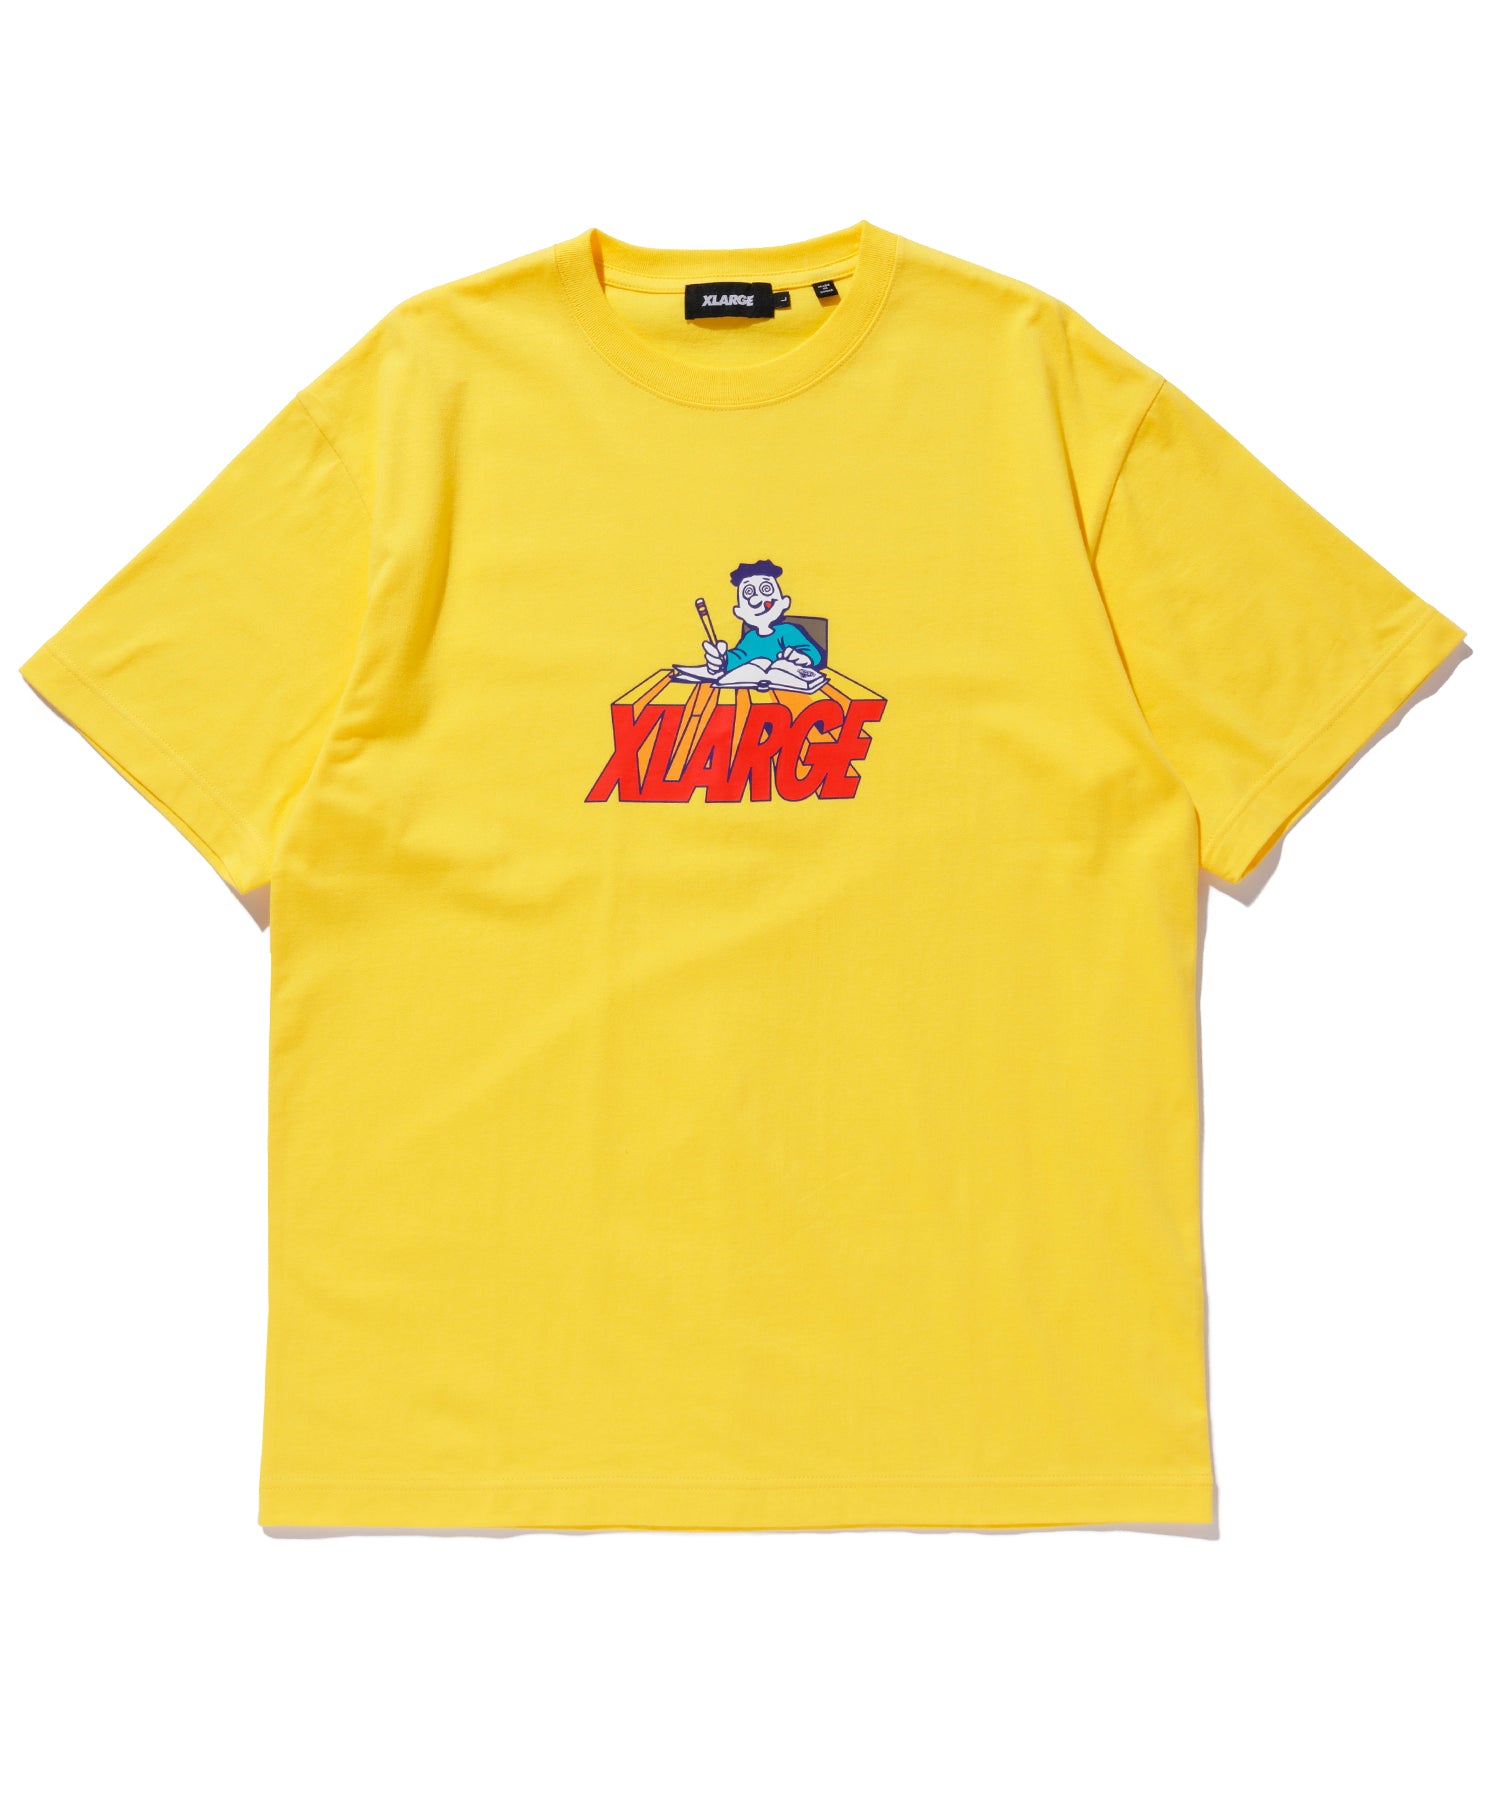 S/S TEE BACK TO SCHOOL T-SHIRT XLARGE  